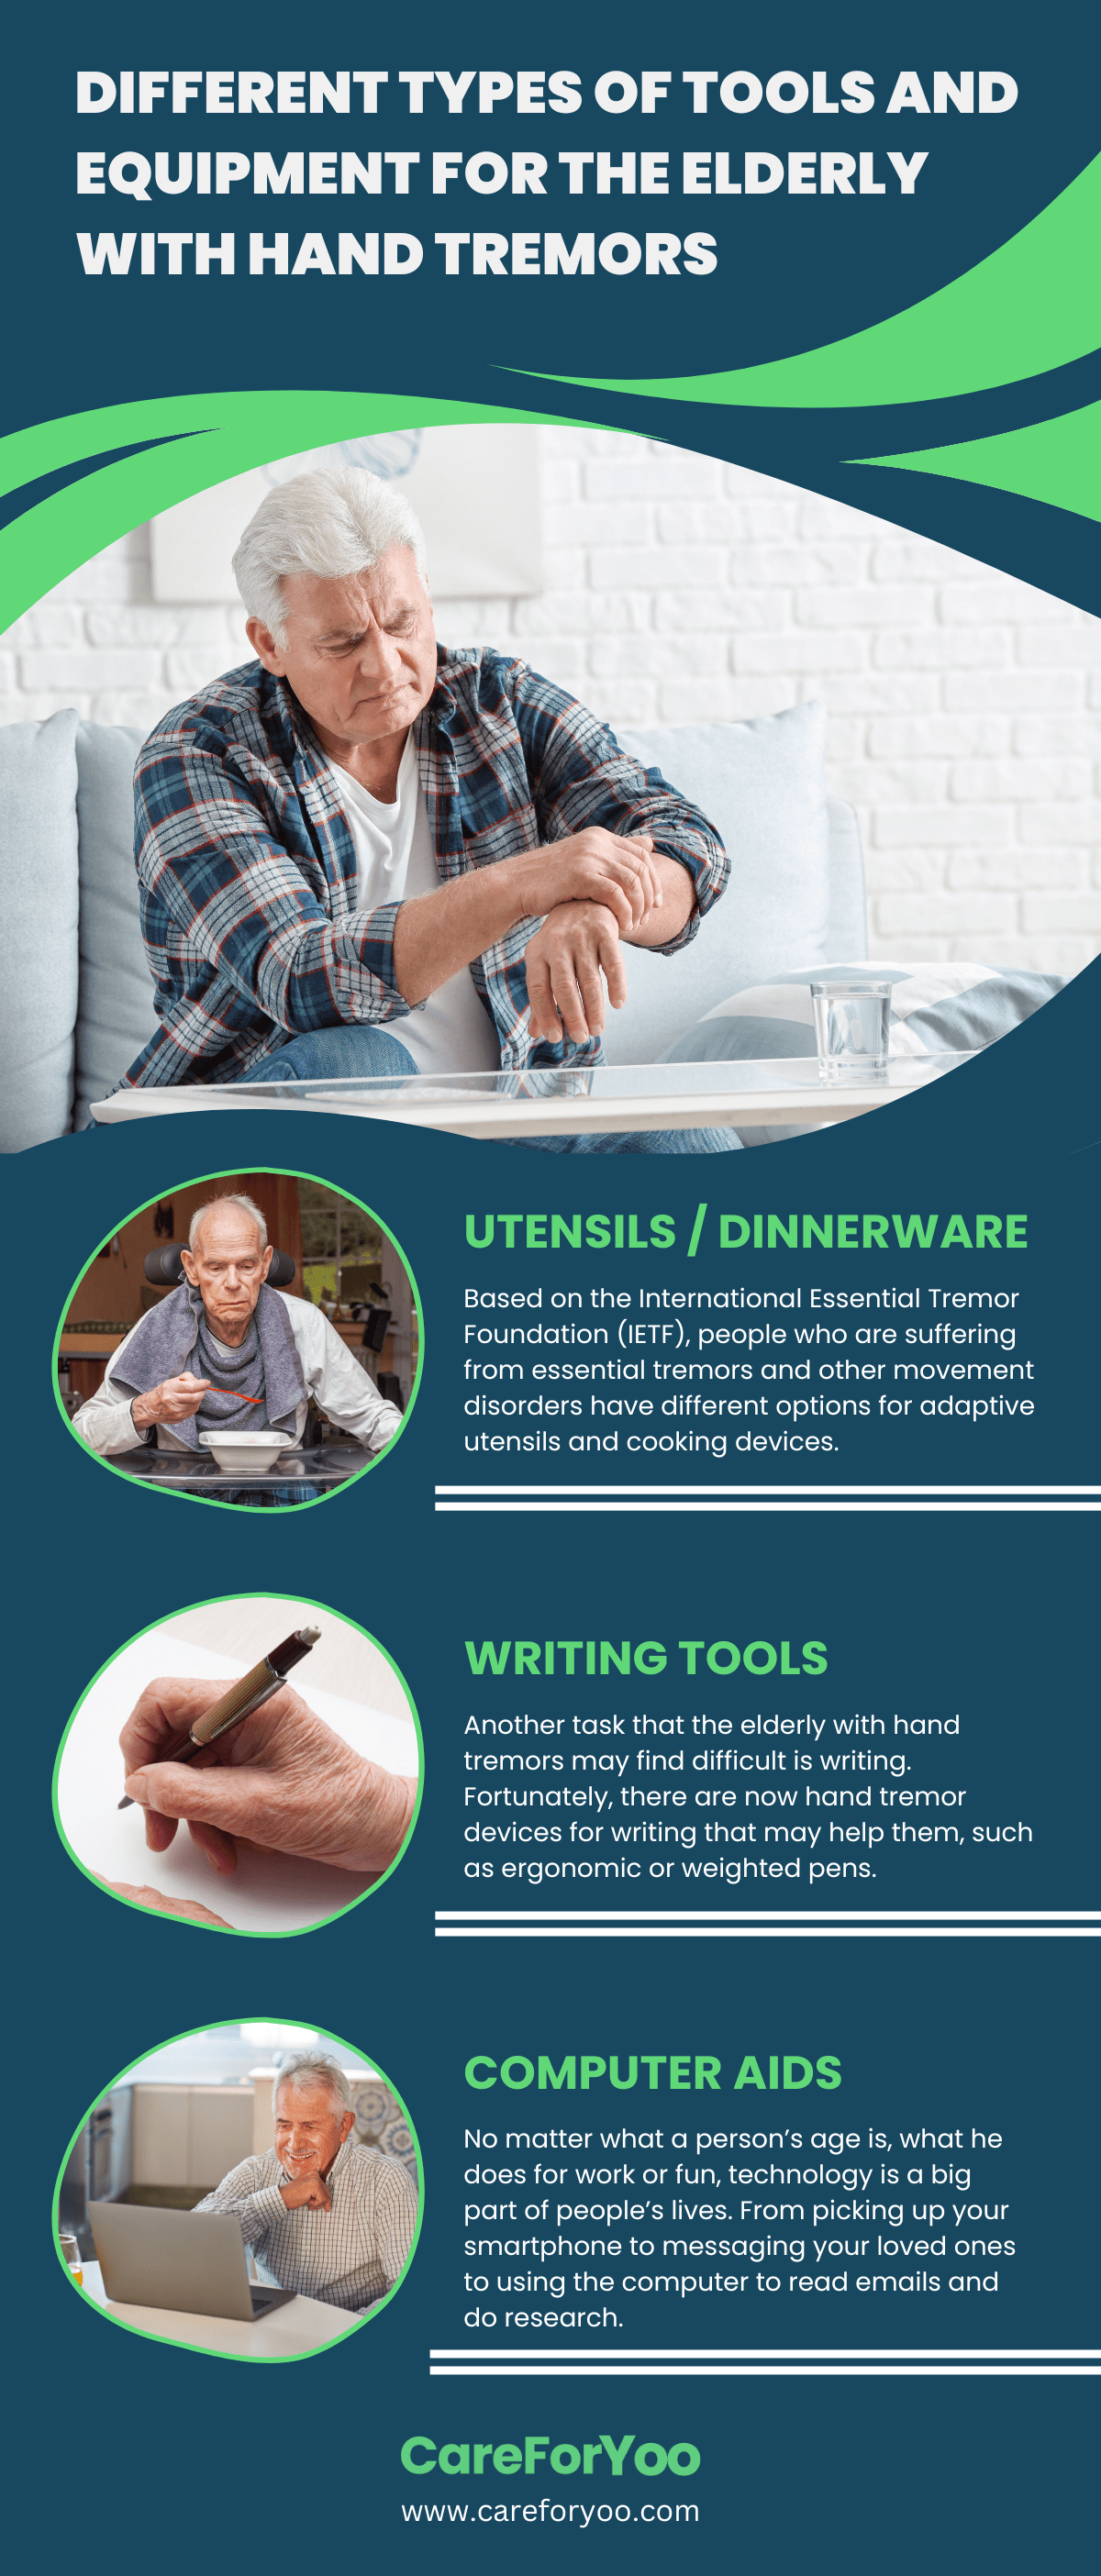 Different Types of Tools and Equipment for the Elderly with Hand Tremors